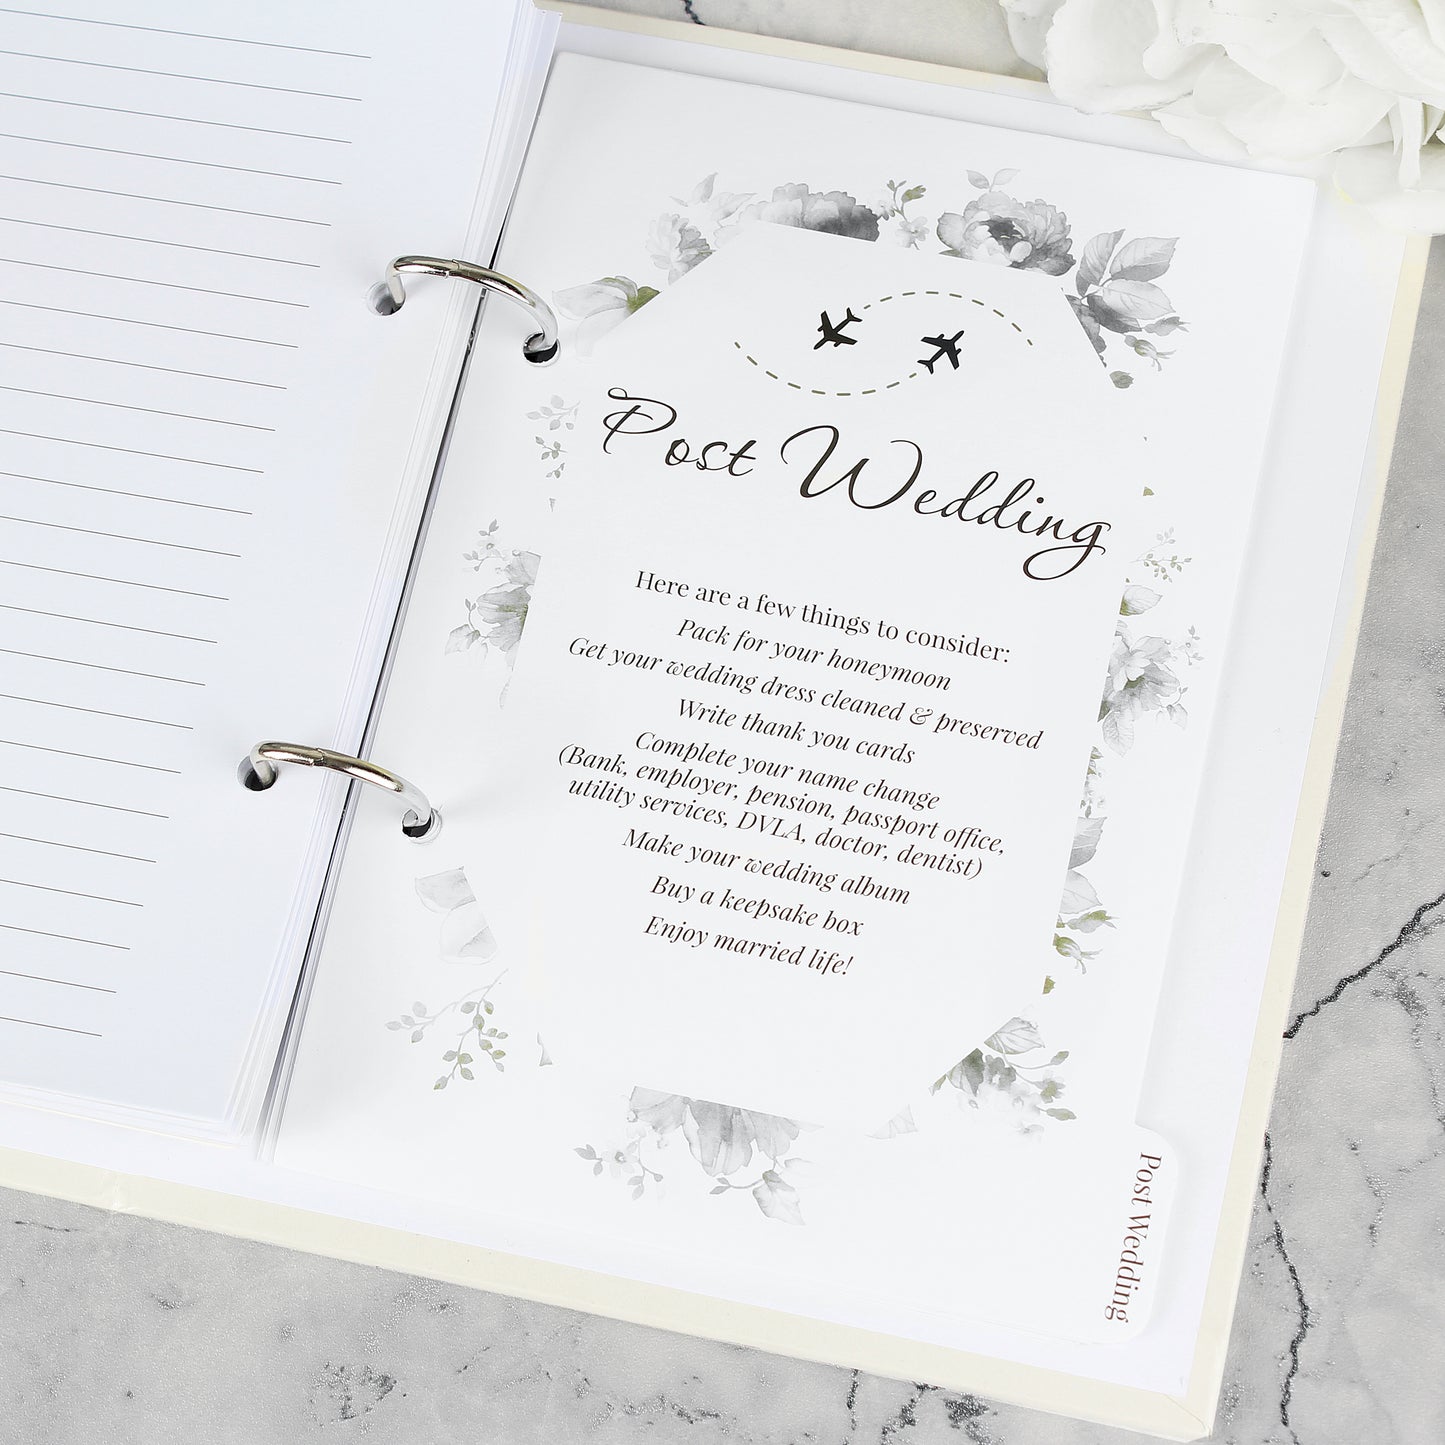 personalised wedding planner with post-wedding section shown